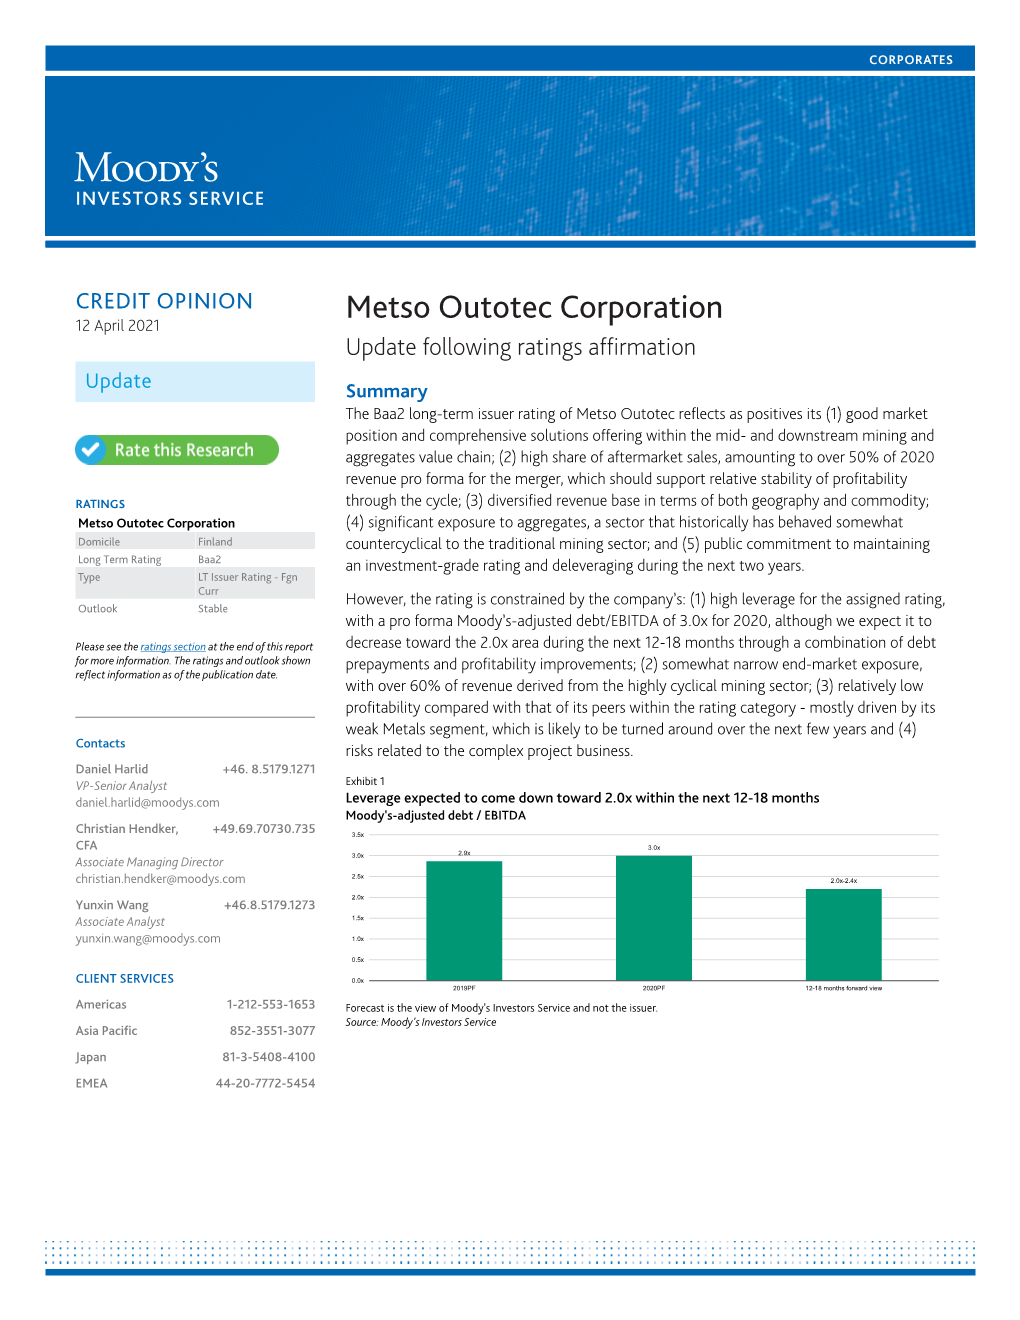 Metso Outotec Corporation 12 April 2021 Update Following Ratings Affirmation